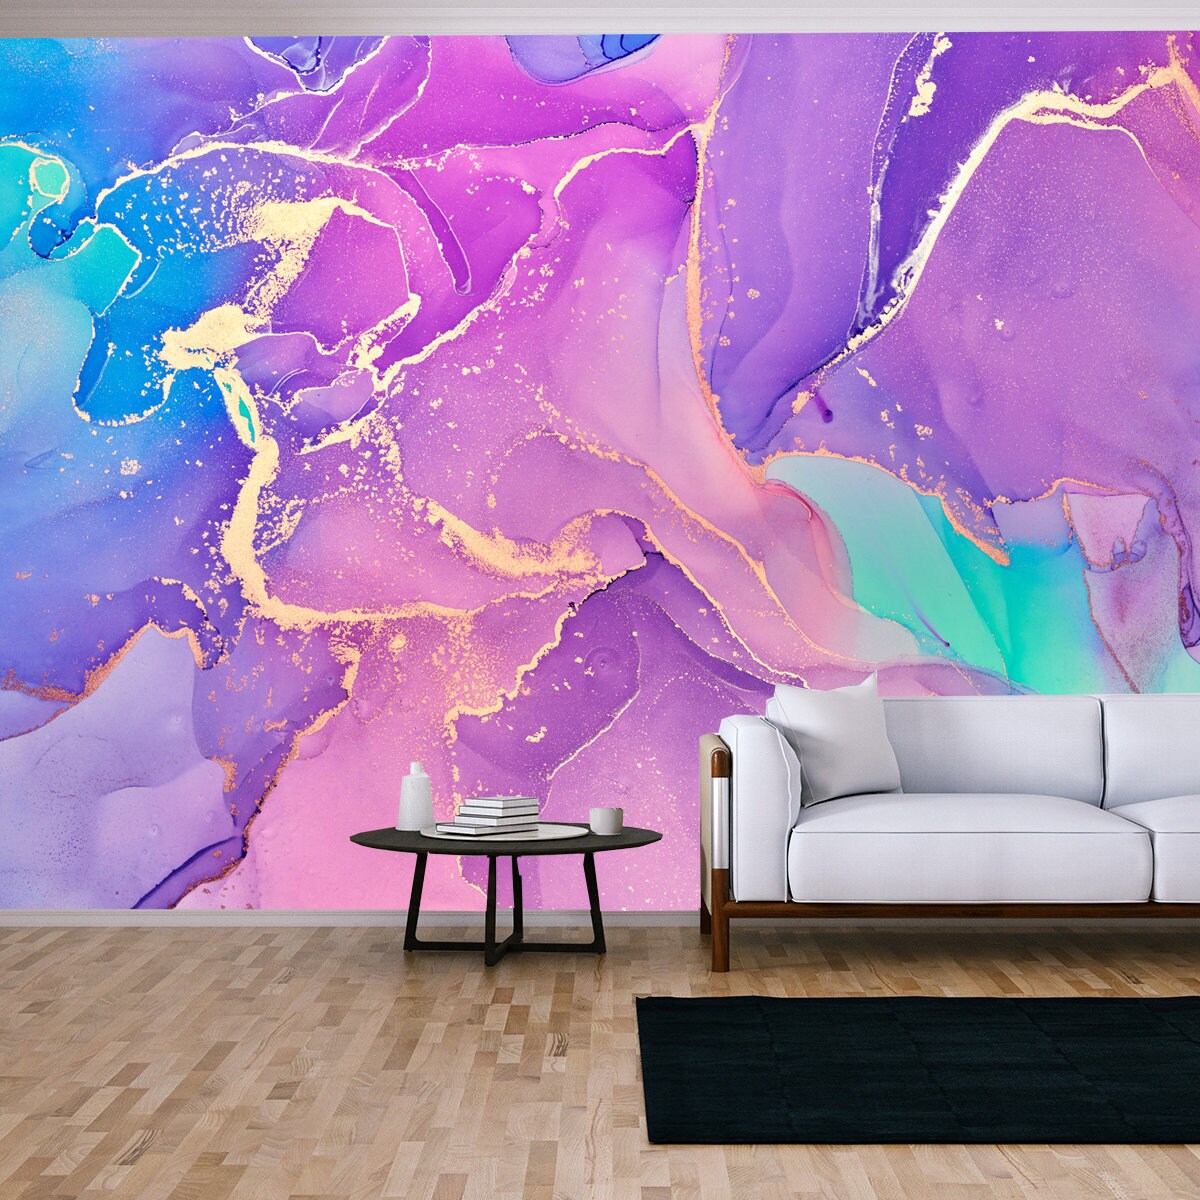 Natural Luxury Abstract Fluid Art Painting in Alcohol Ink Technique. Tender and Dreamy Wallpaper Living Room Mural